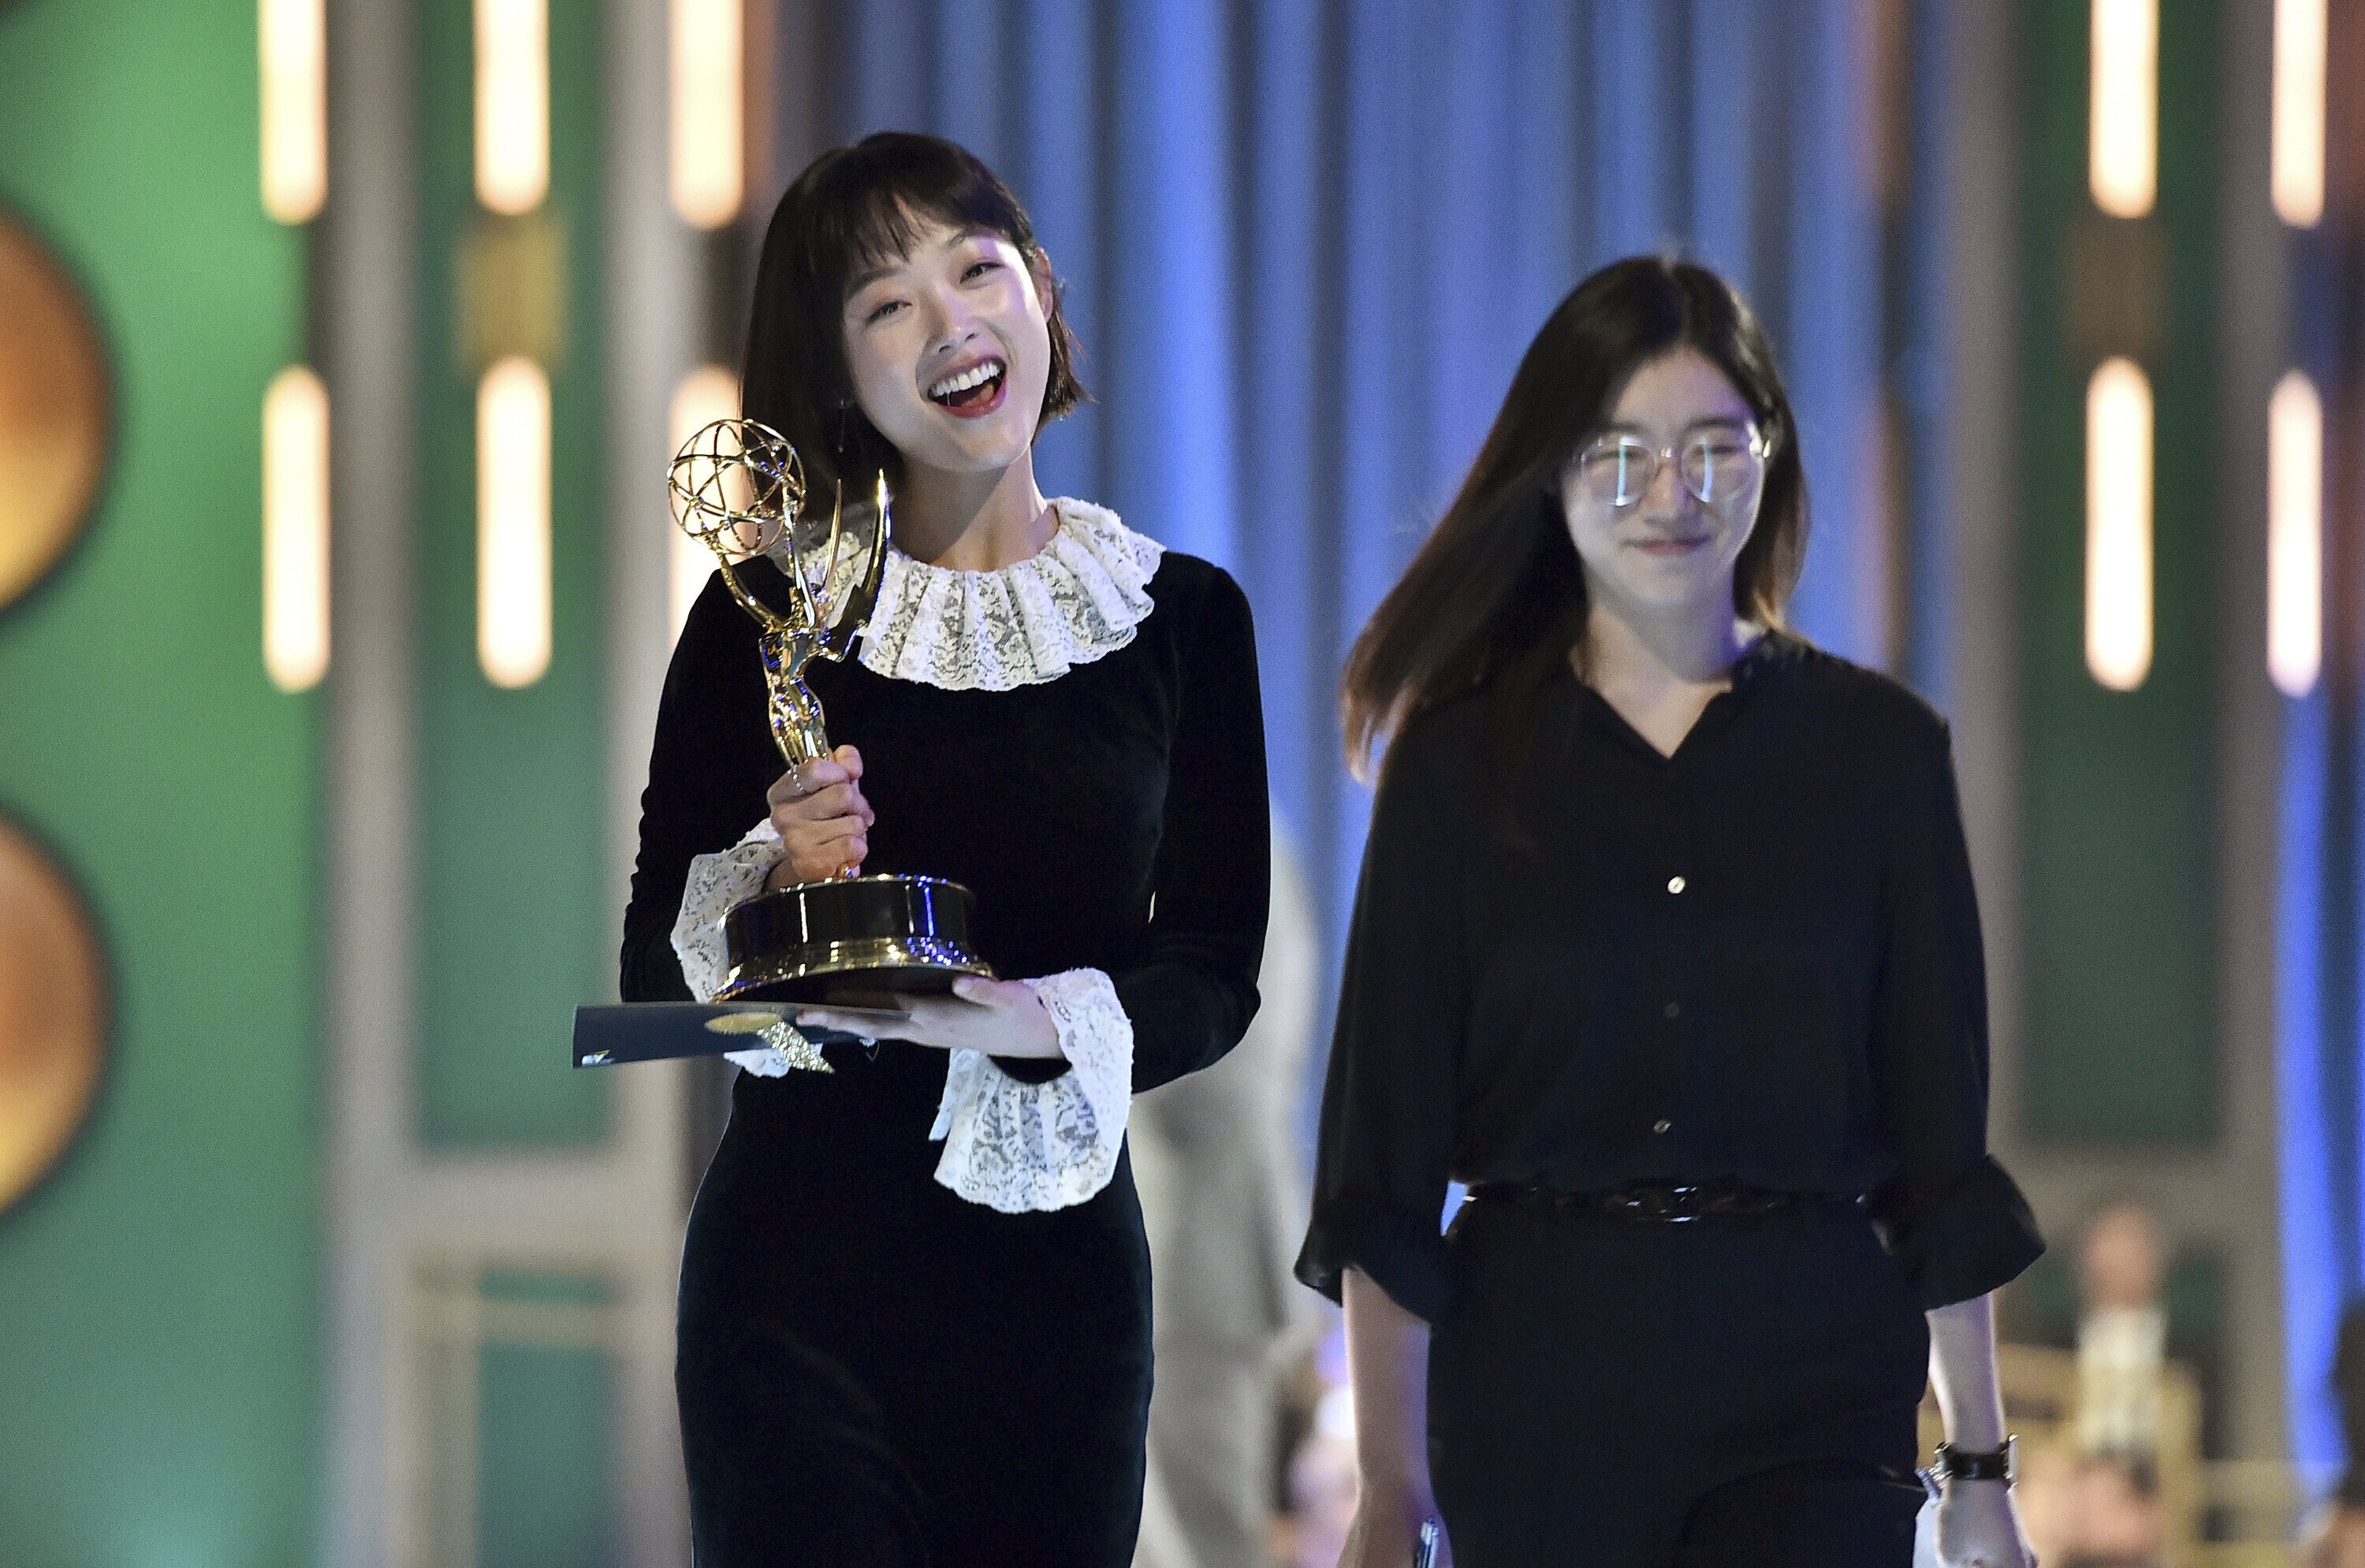 Lee You-mi (L) and a translator walking backstage after she wins the Emmy for outstanding guest actress in a drama series for the "Gganbu" episode of "Squid Game" on the 2nd night of the Television Academy's 2022 Creative Arts Emmy Awards, Los Angeles, U.S., Sept. 4, 2022. (AP Photo)